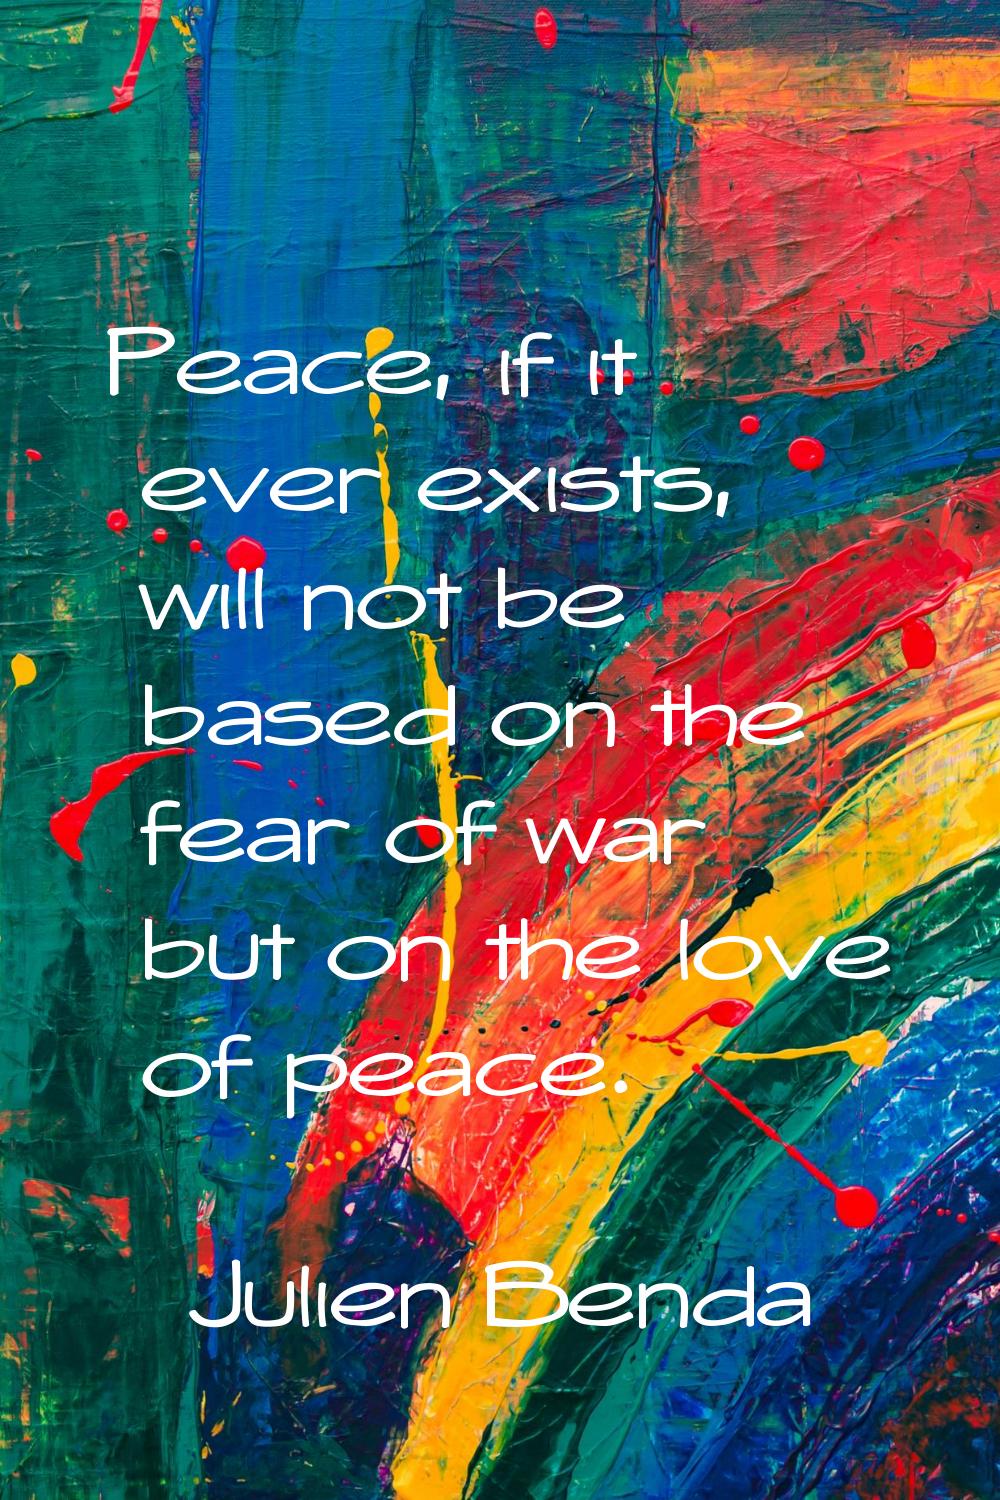 Peace, if it ever exists, will not be based on the fear of war but on the love of peace.